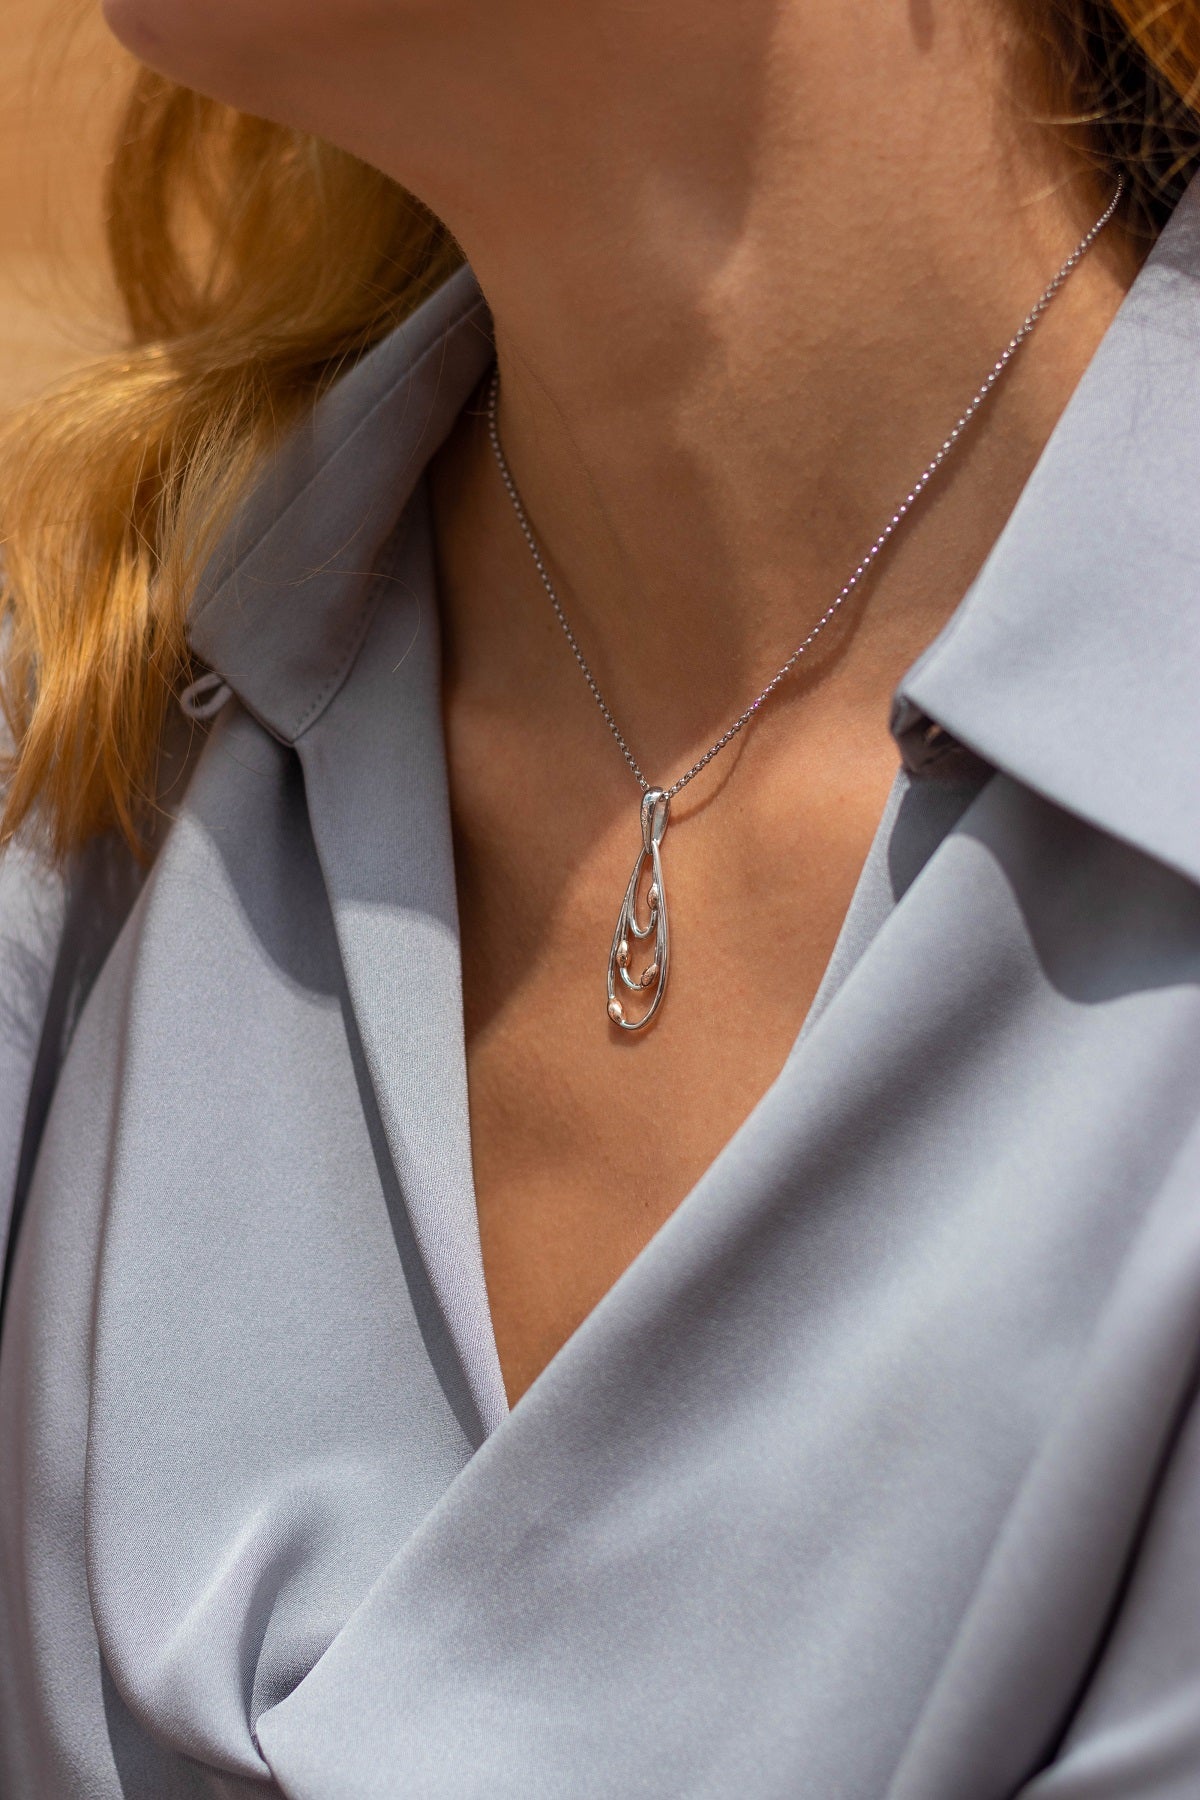 Sun After The Storm Necklace - Rhodium and  Rose Gold Plated Sterling Silver